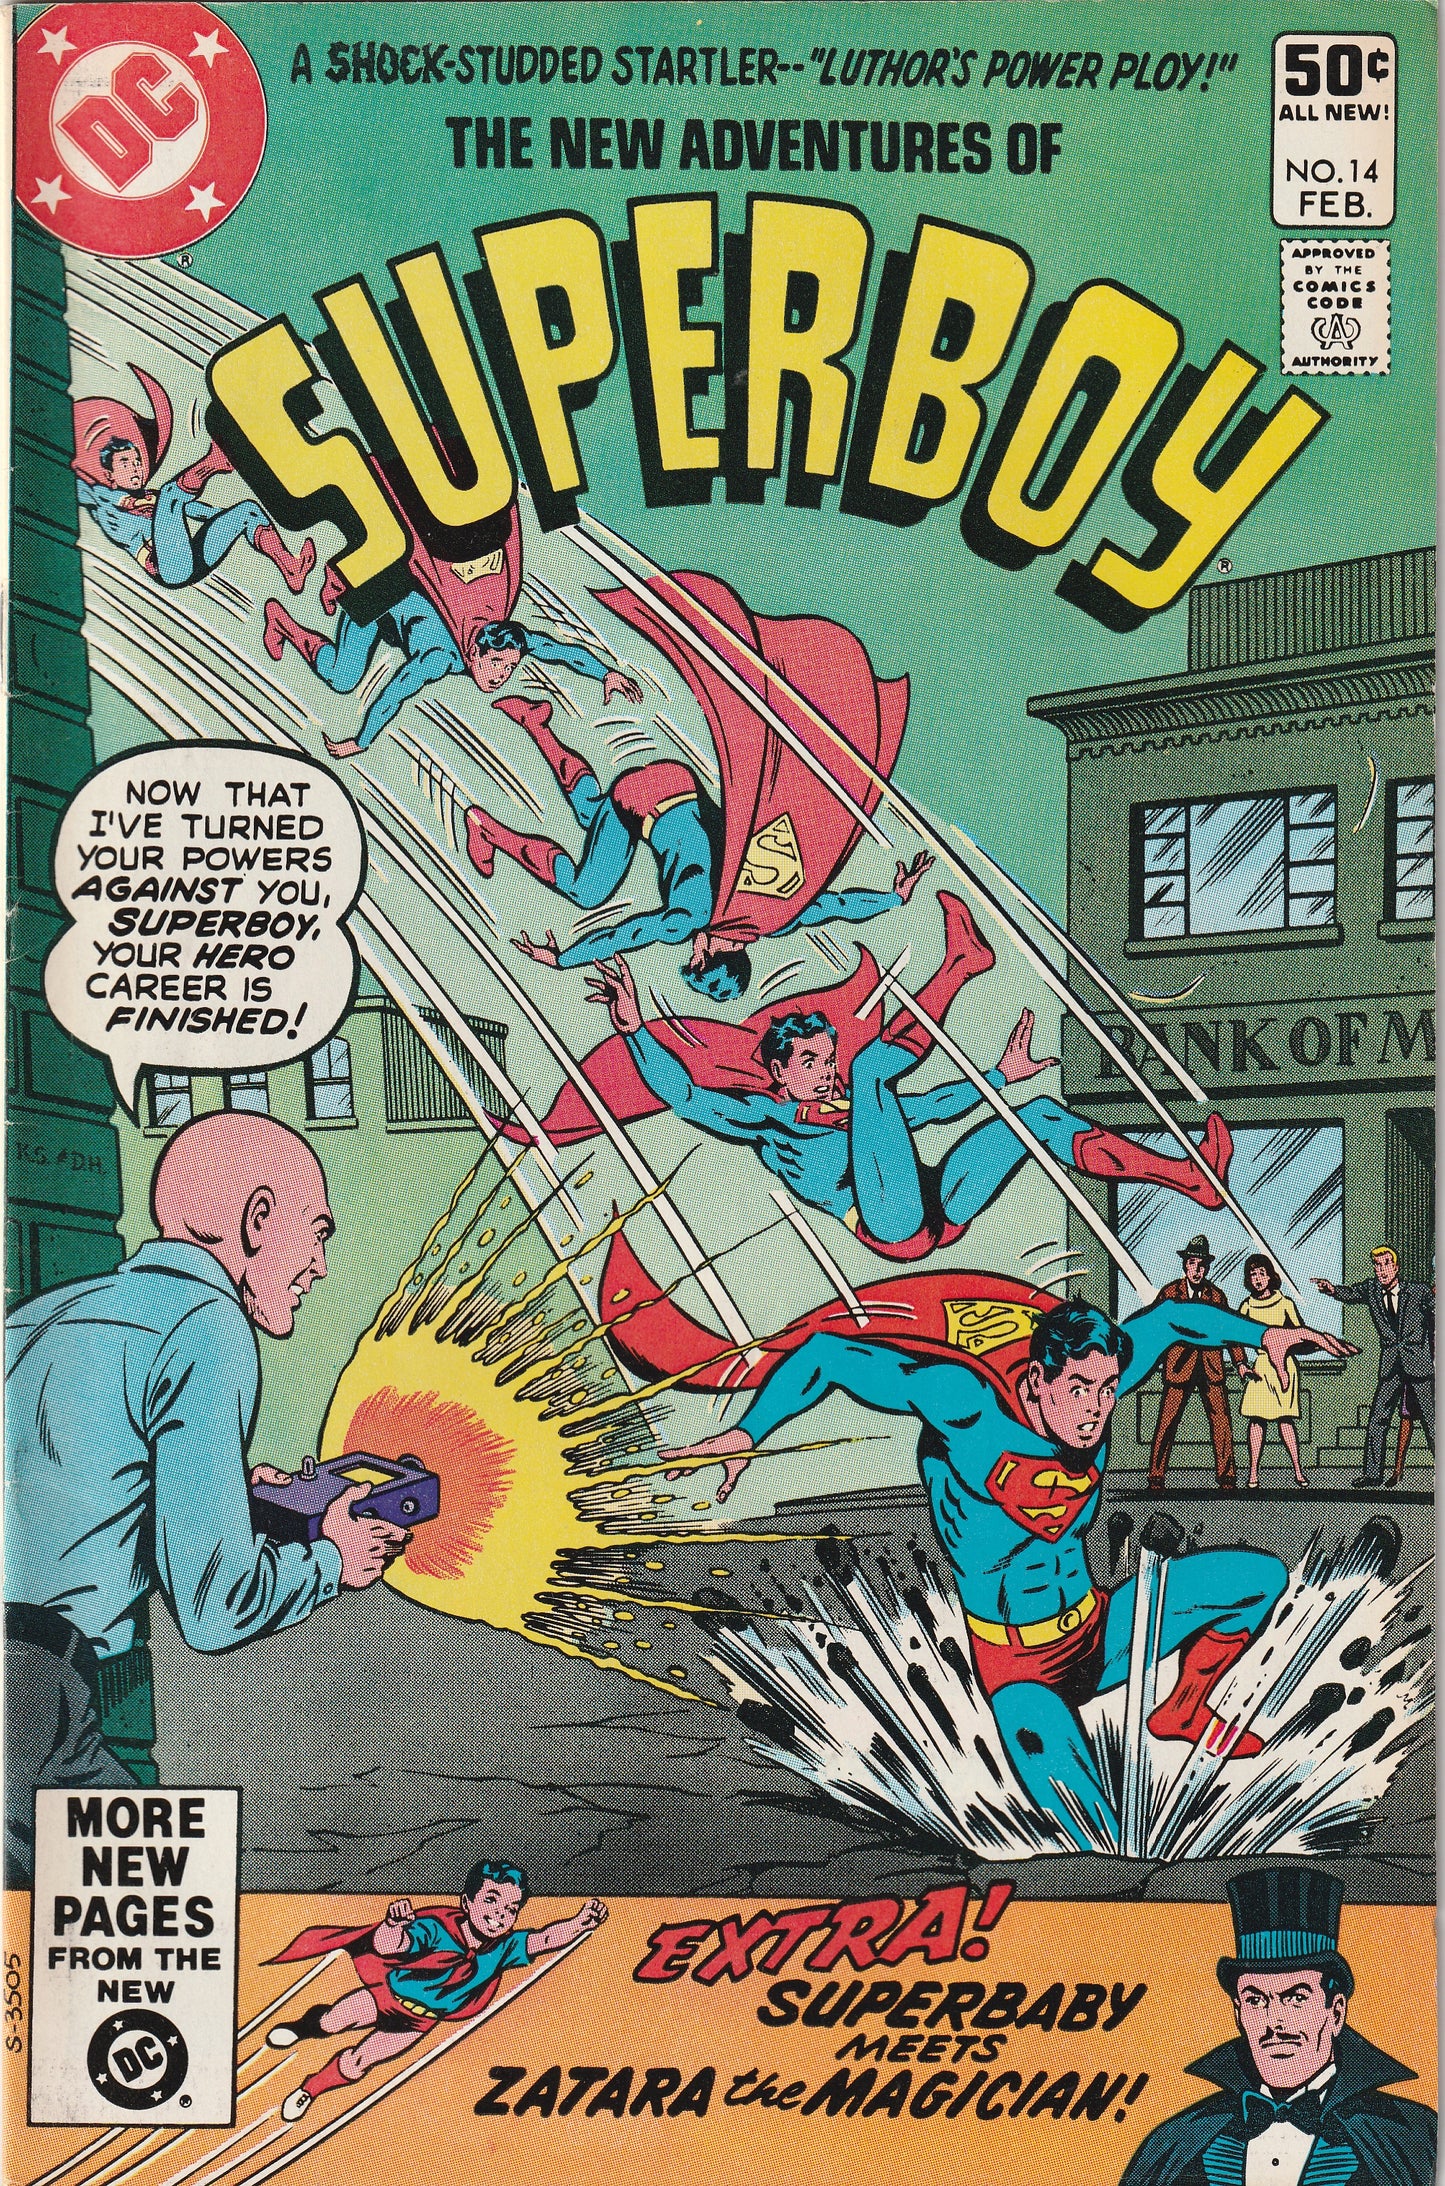 New Adventures of Superboy #14 (1981) - Lex Luthor appearance